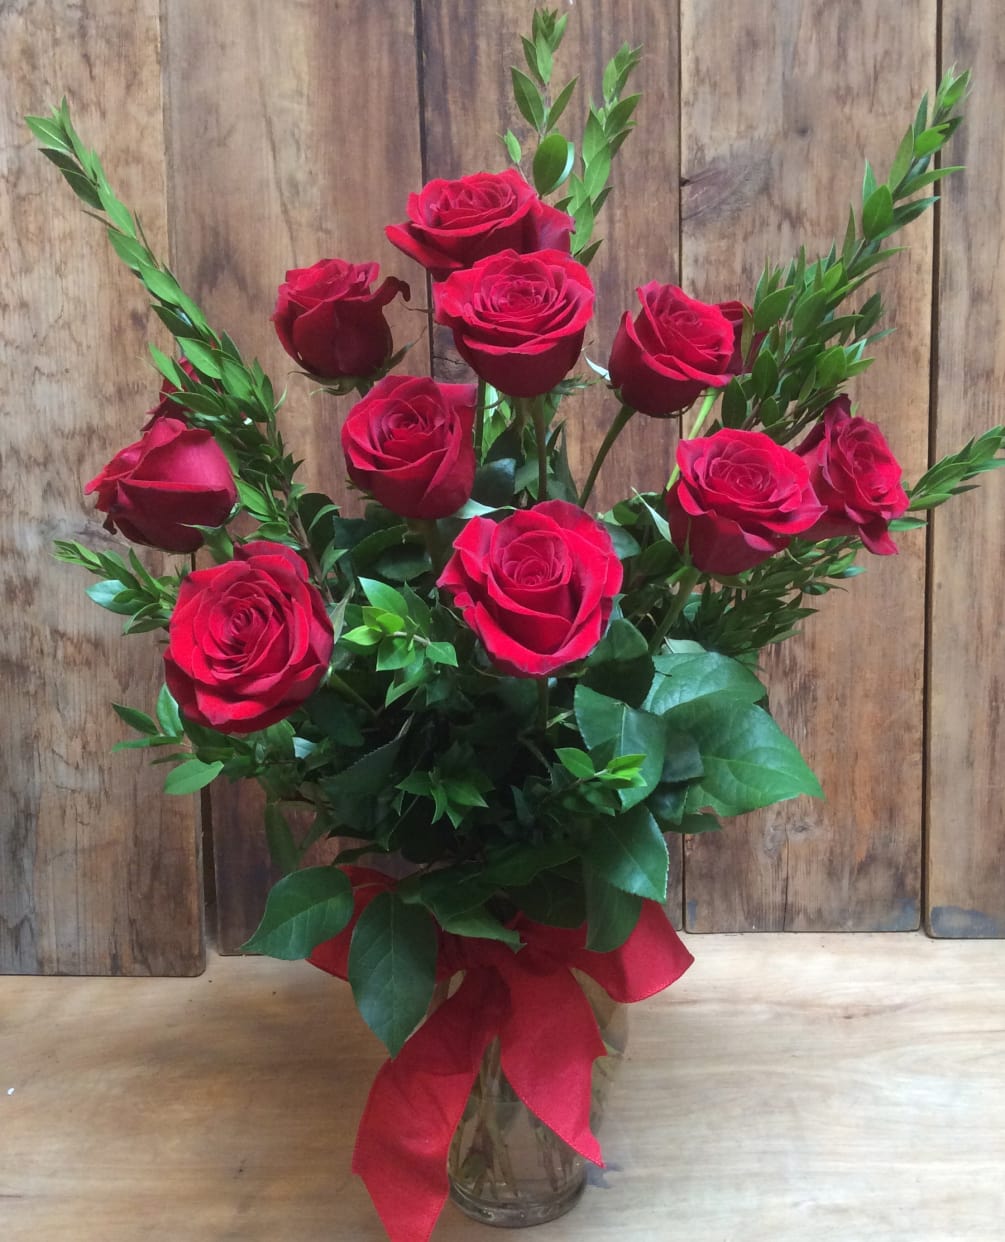 Give the ultimate expression of romance with this stunning, handcrafted arrangement of